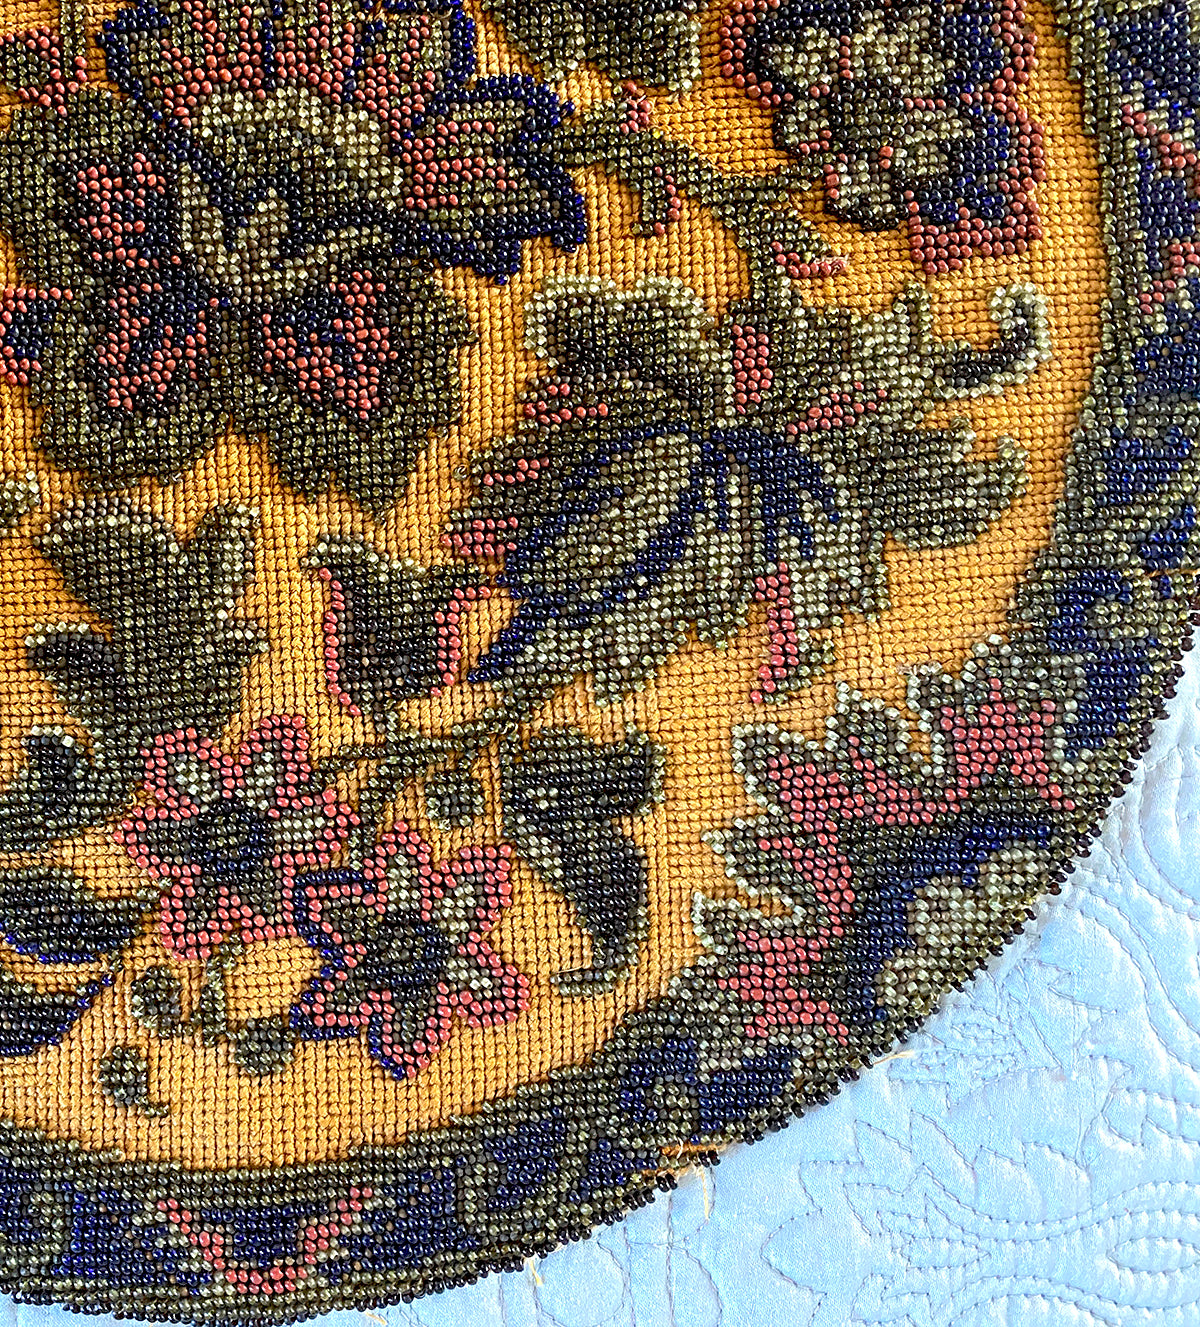 Unused 14" Diam Antiuqe Victorian Glass Beadwork Tapestry Panel, Beaded Needlepoint for Pillow